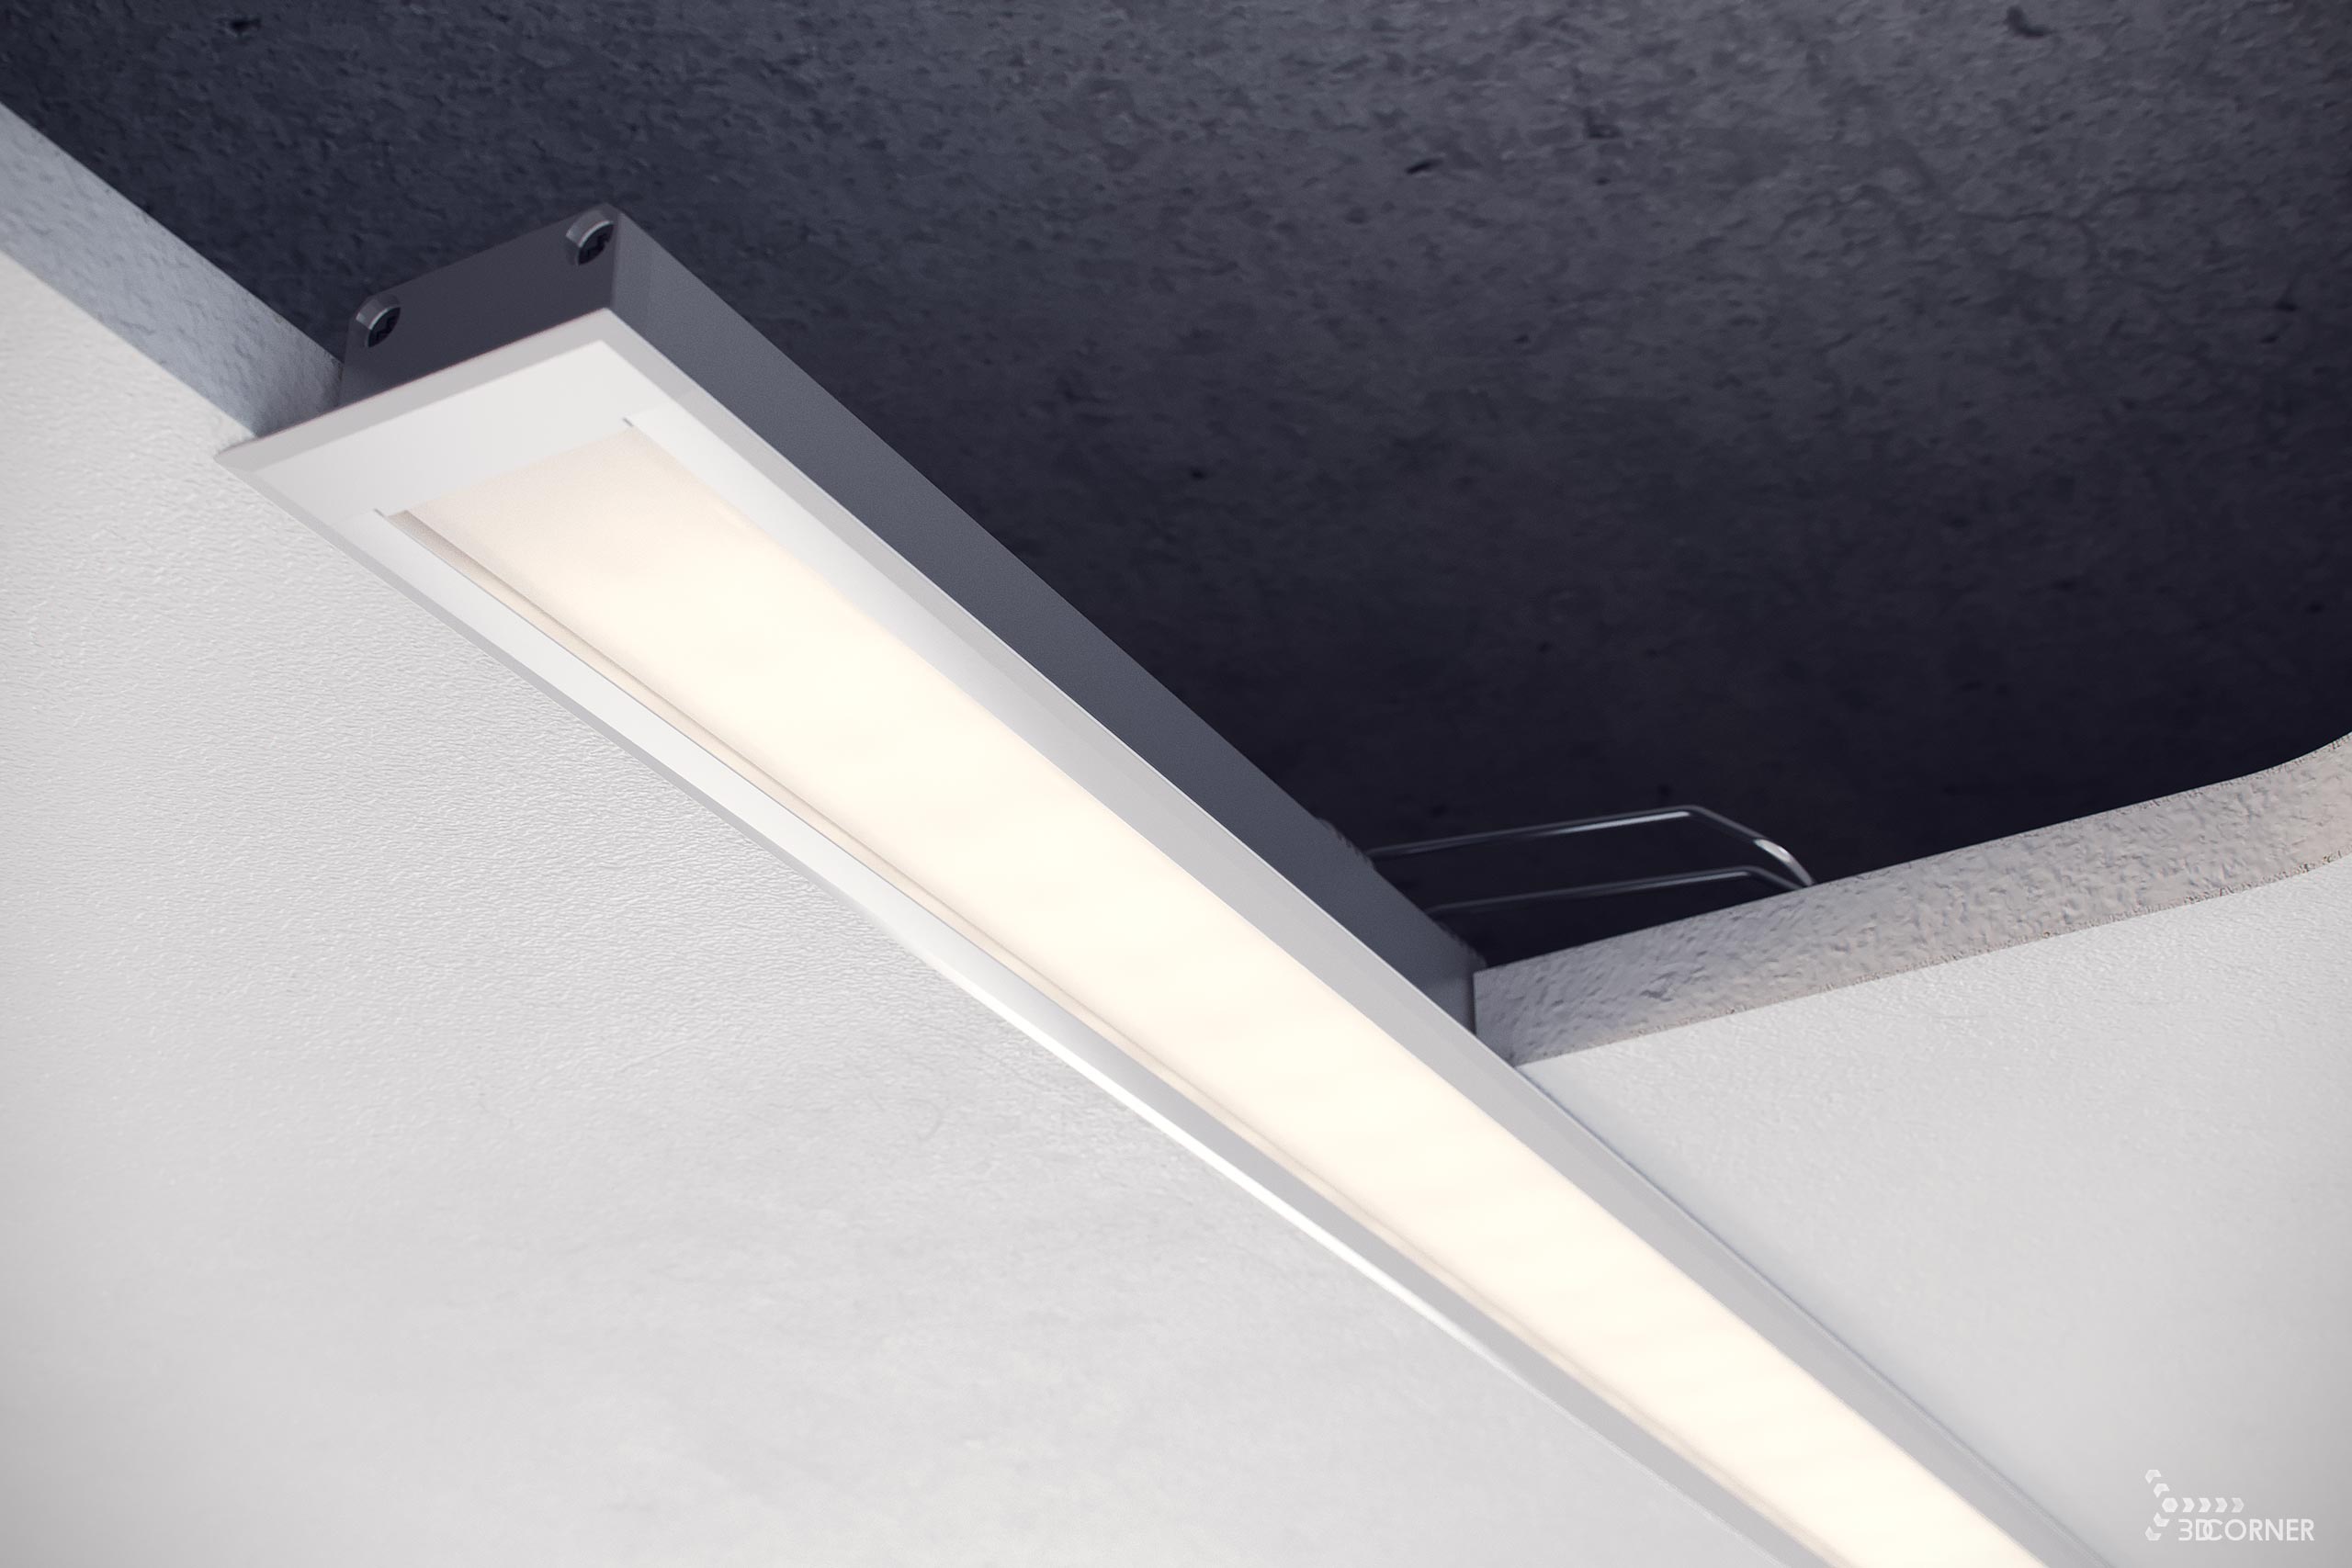 Photorealistic visualization of installation and plaster instructions for LED strip aluminium profile.